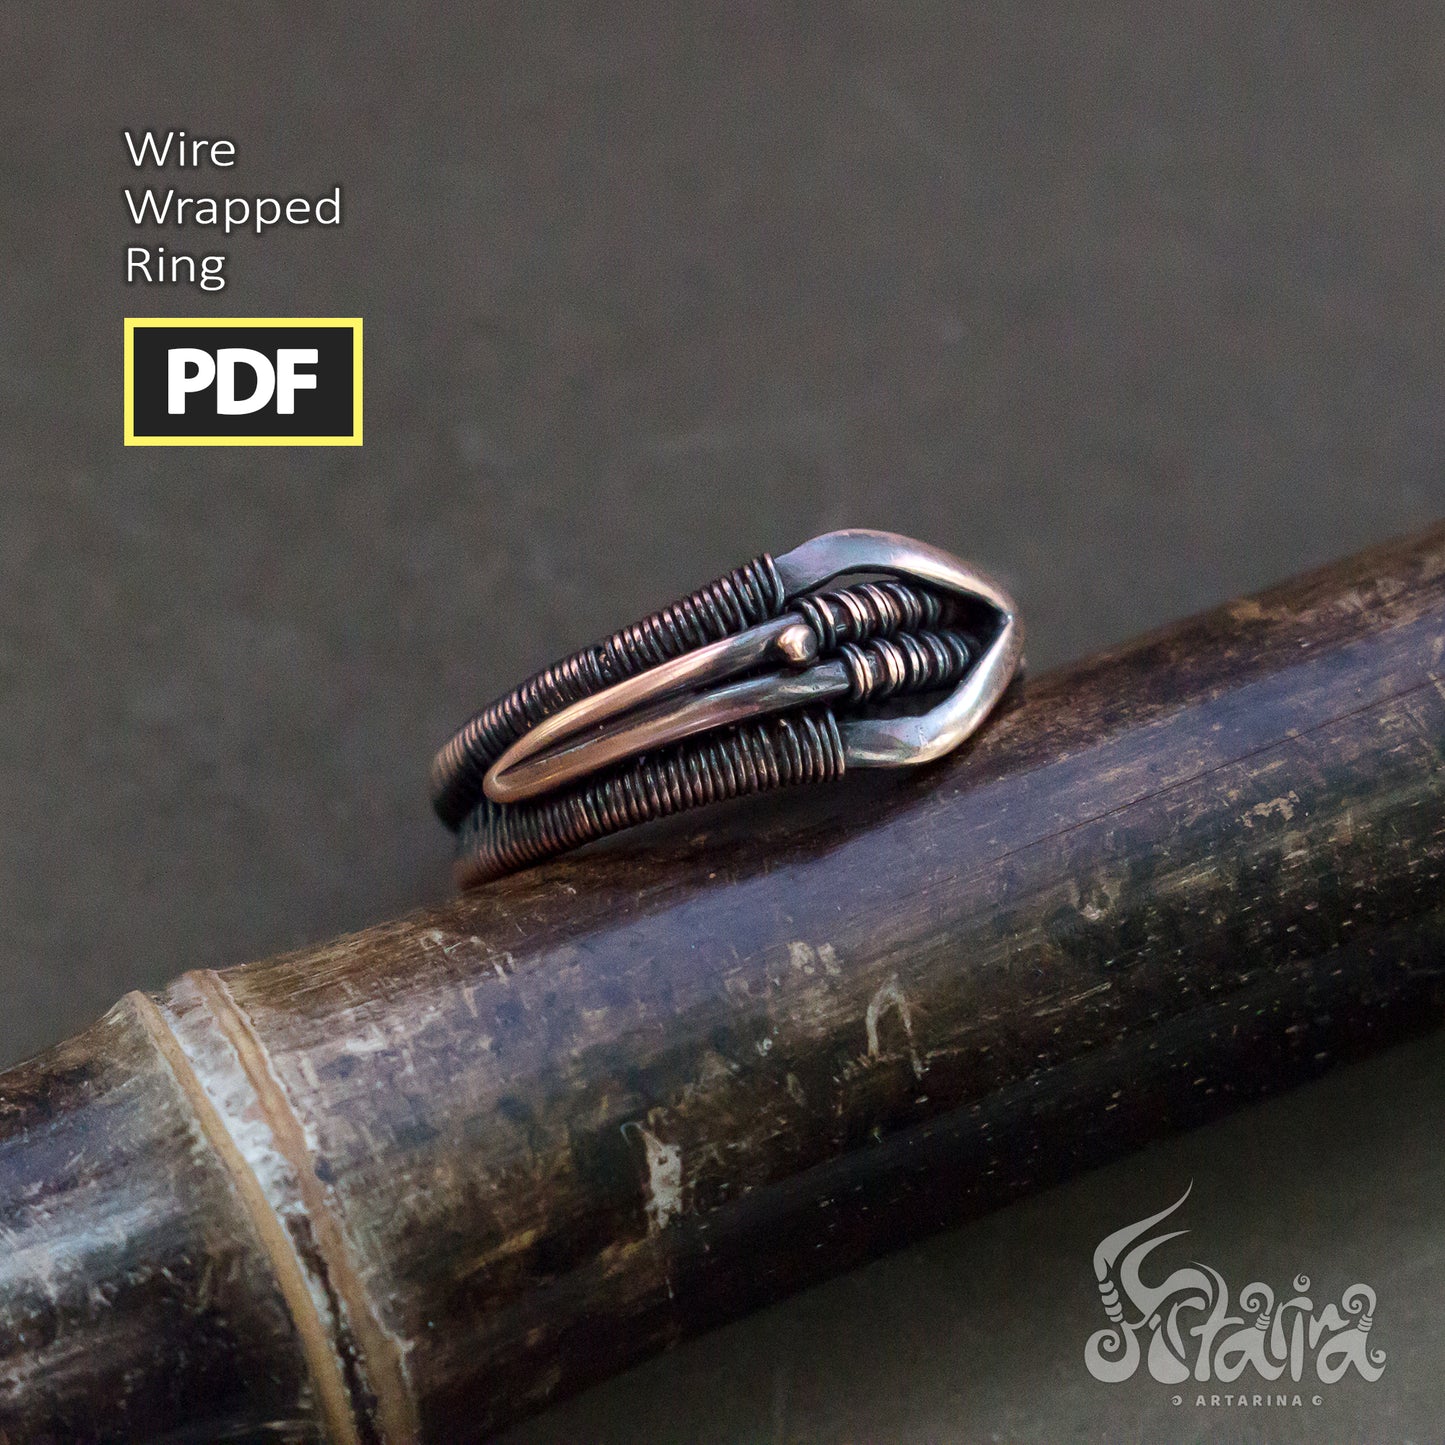 Wire wrapped handmade ring tutorial | Copper unique ring diy PDF | Wire wrap lessons | Unique ring by your hands